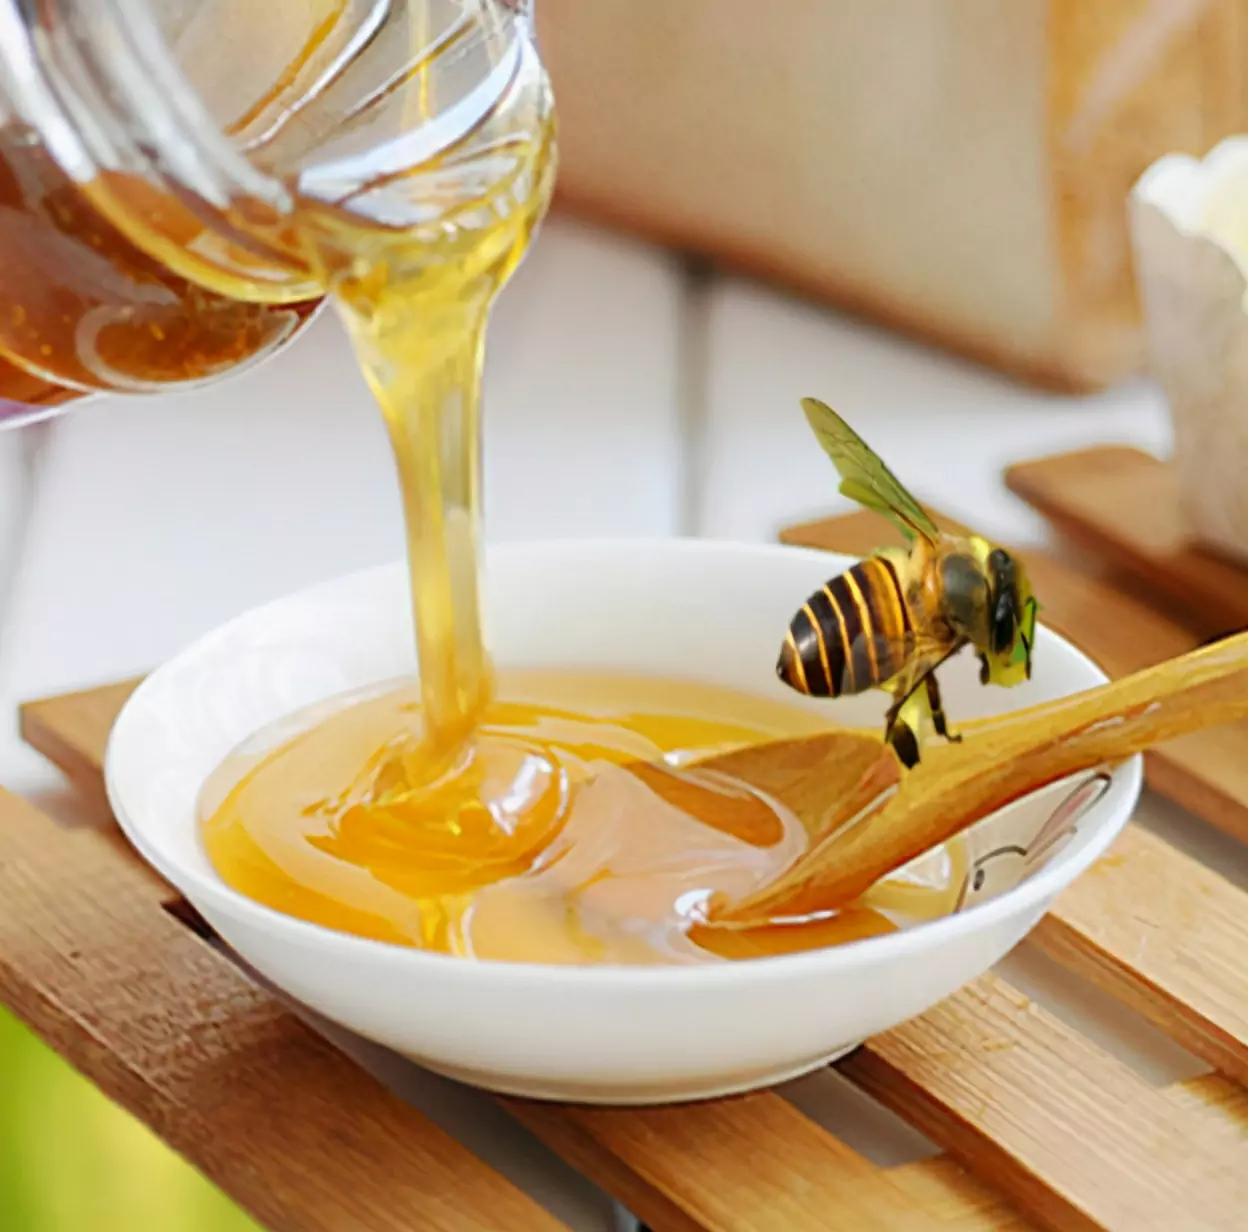 Is Honey Bad for Dogs? Aspects of Honey That Can Help Dogs